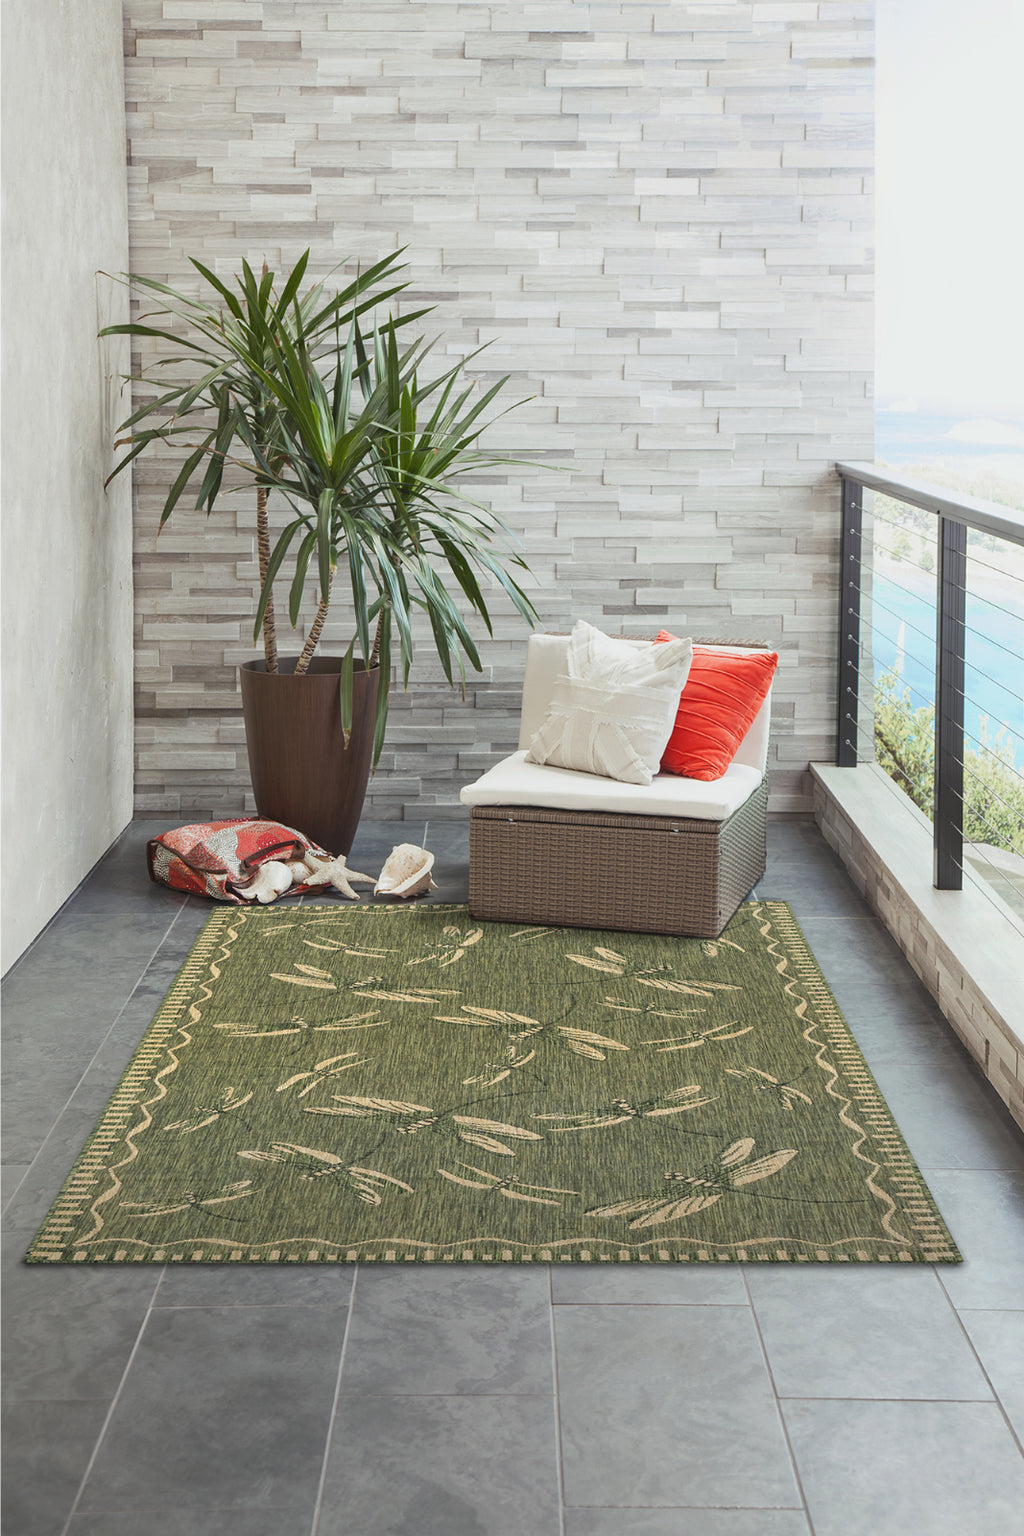 Trans Ocean Carmel 8440/06 Dragonfly Green Area Rug by Liora Manne Room Scene Image Feature